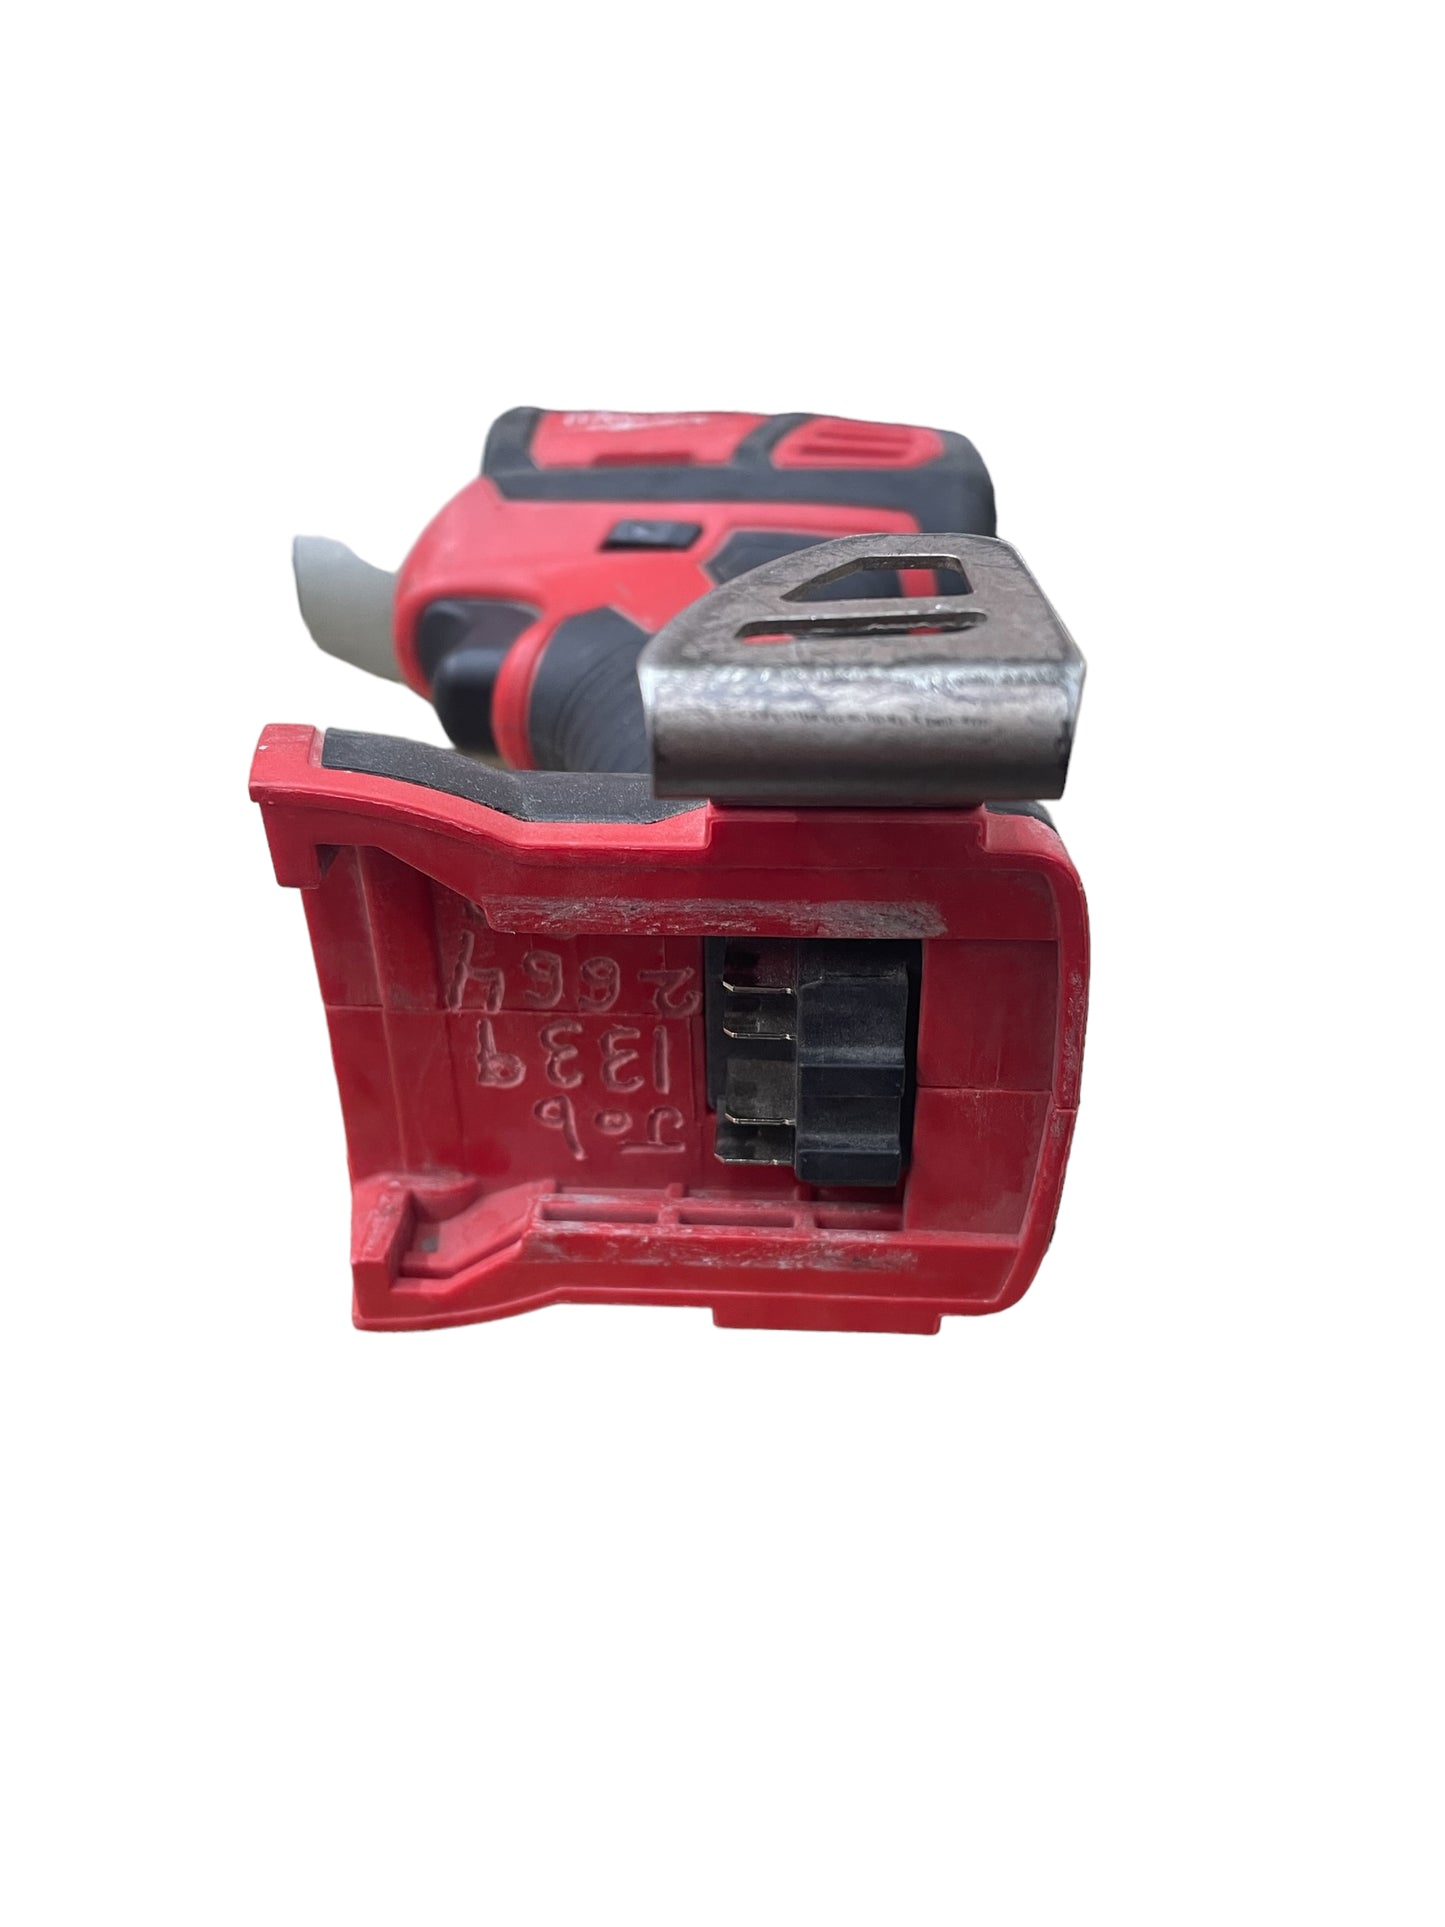 Milwaukee 2656-20 M18 1/4" Hex Impact Driver (Tool Only)